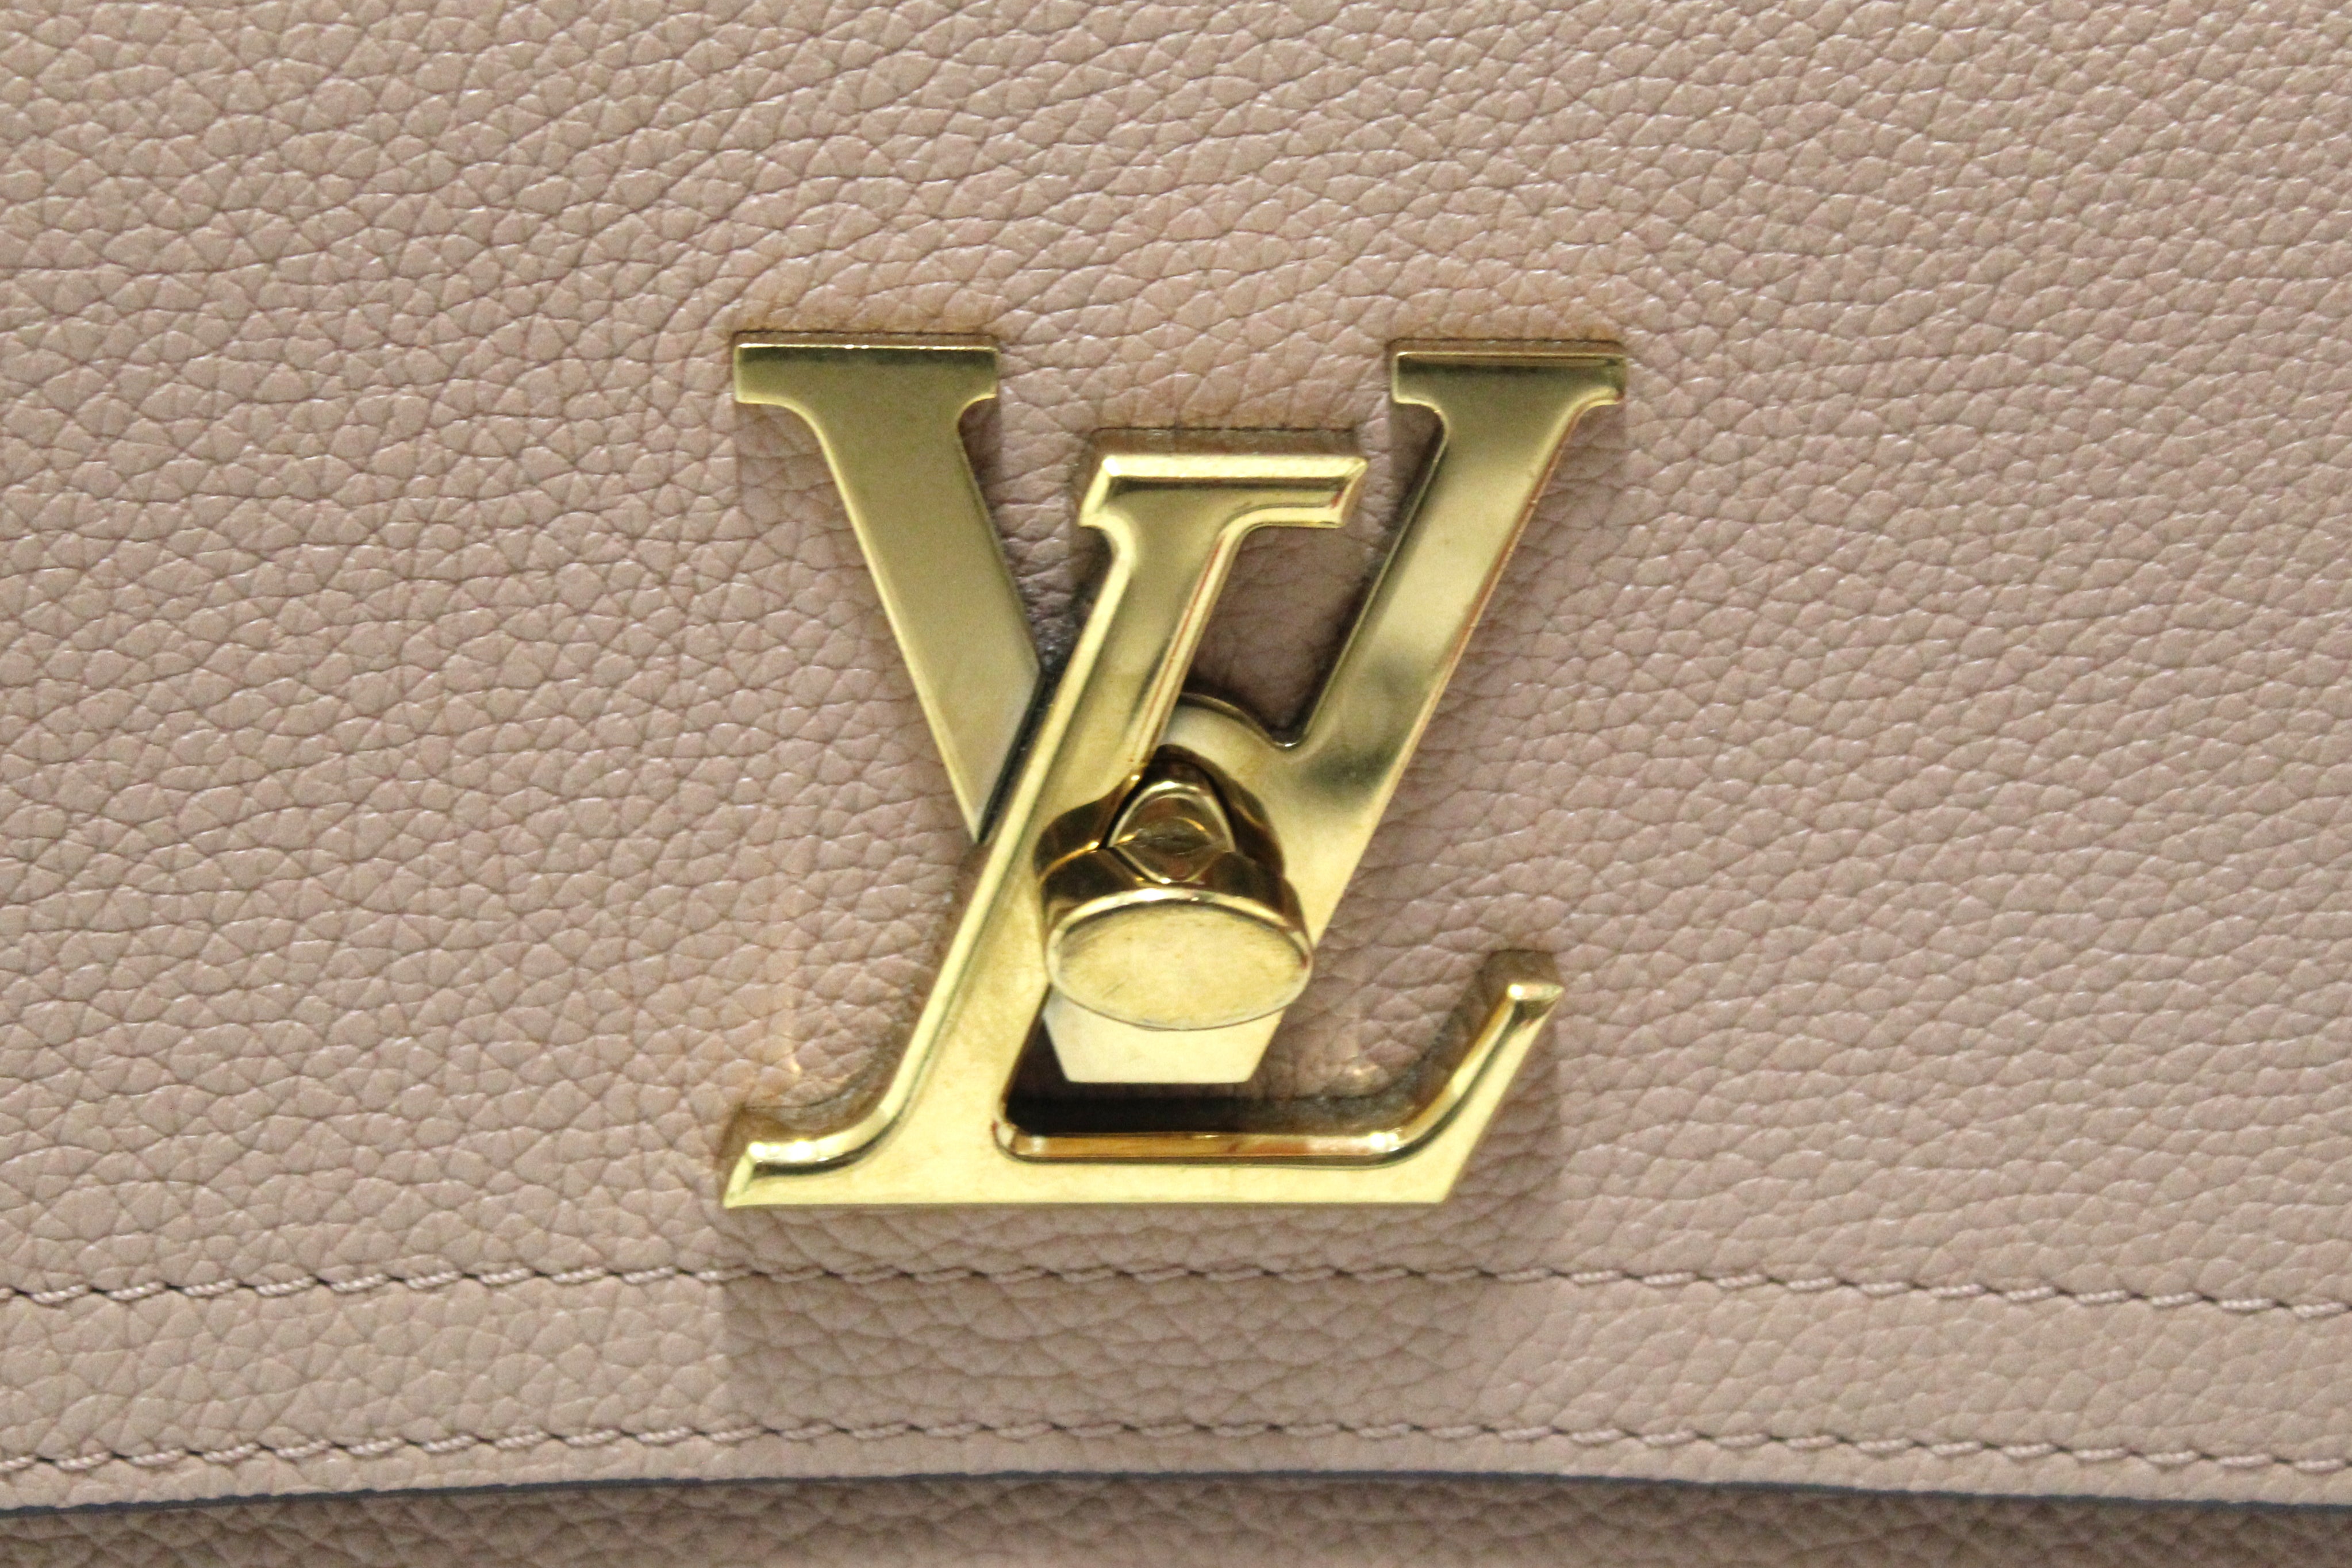 Louis Vuitton All Set Bag Calf Leather MM at 1stDibs  louis vuitton all in  mm, louis vuitton calf leather bag, lv calf leather